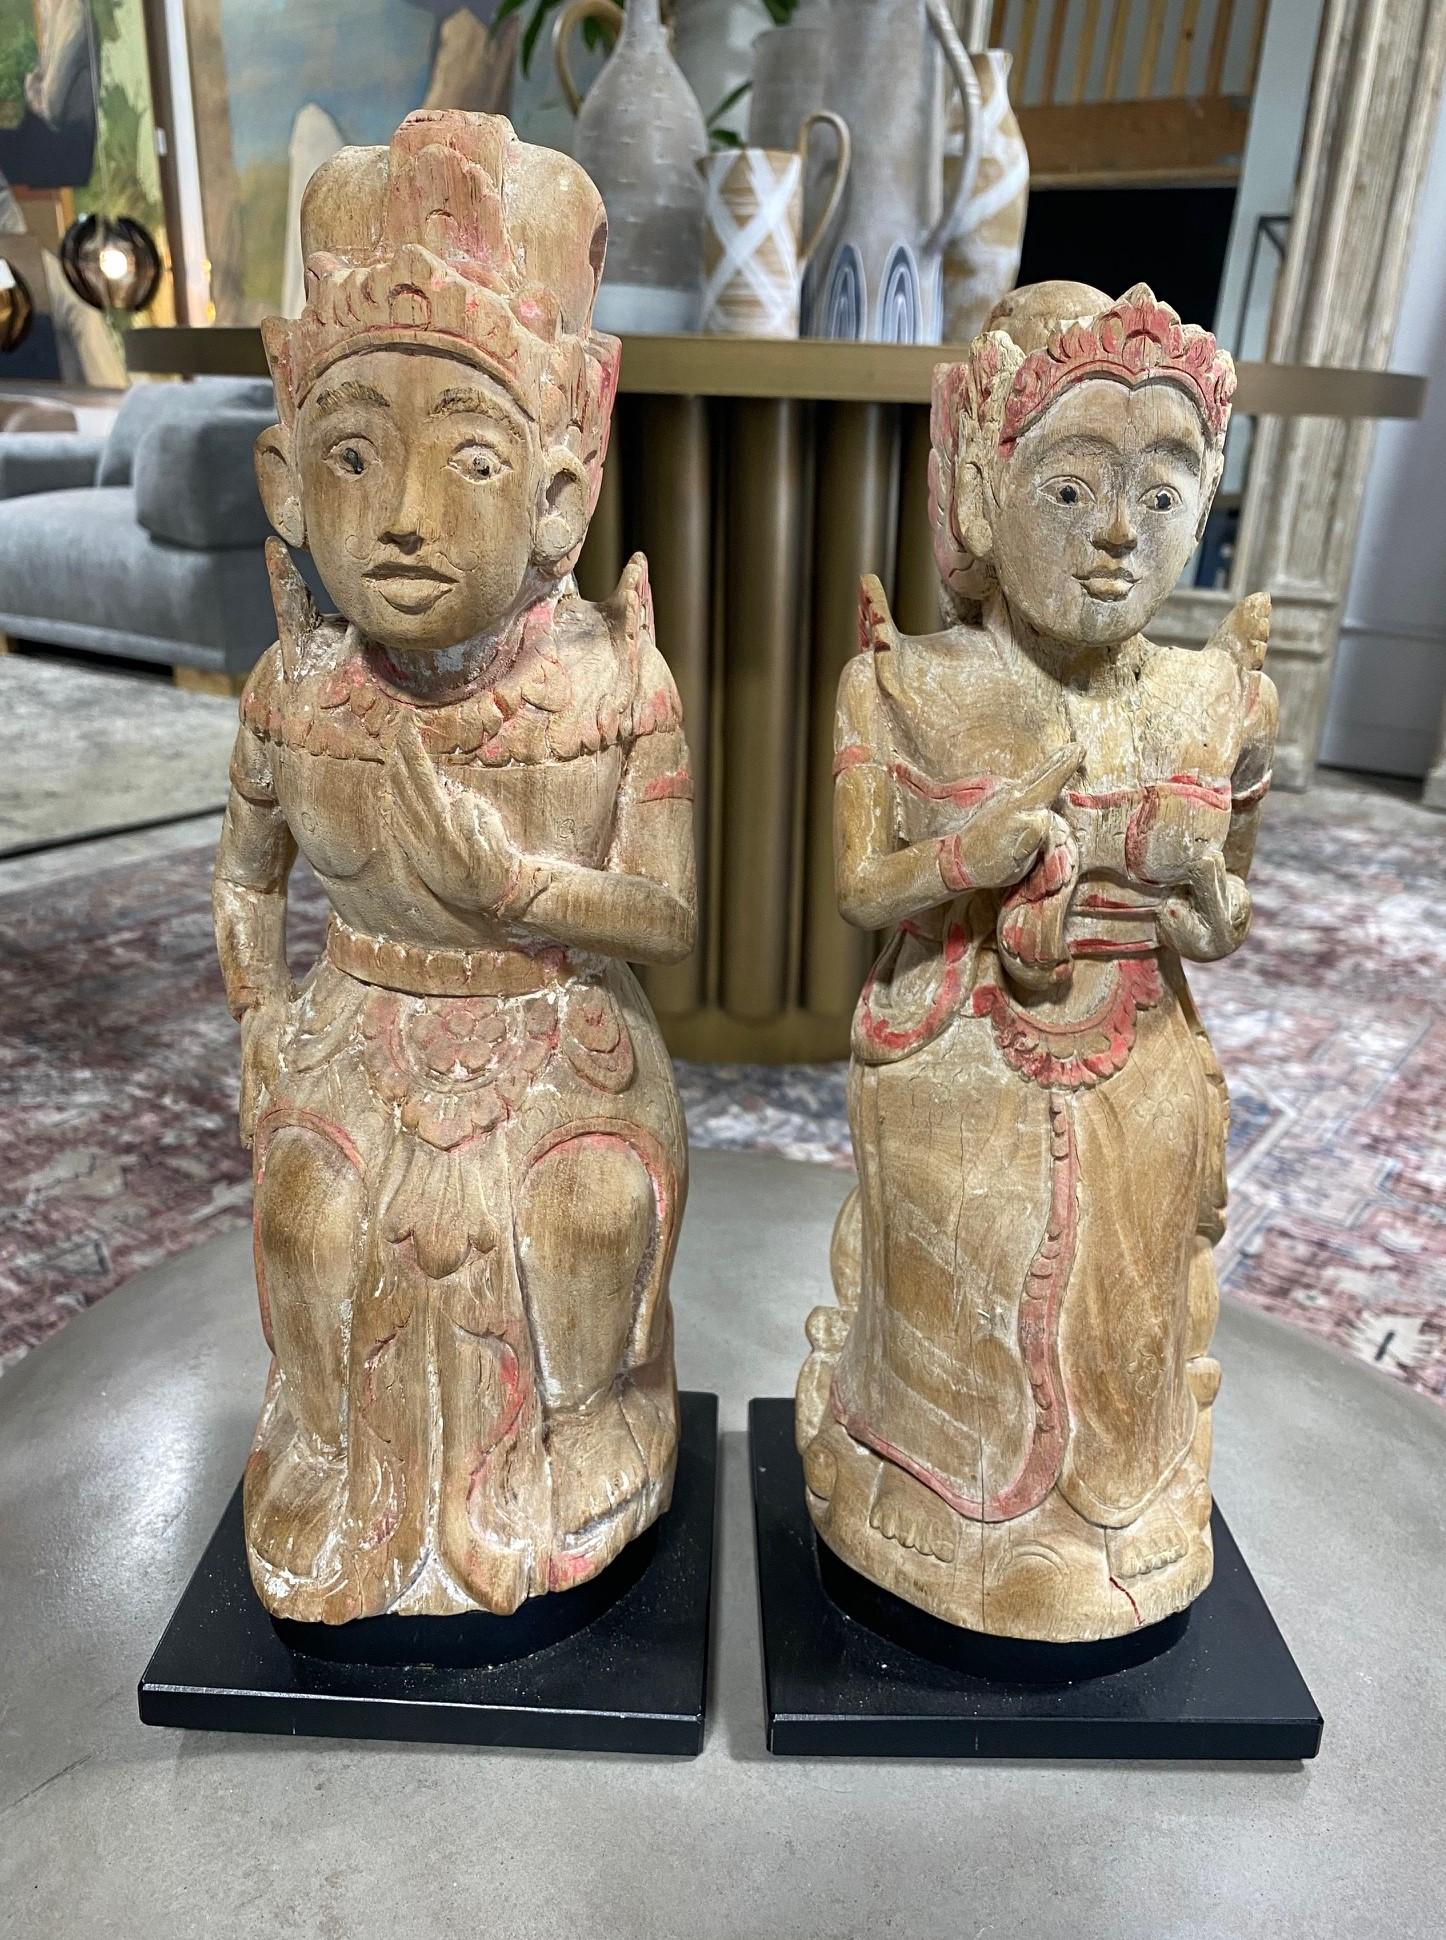 Wonderful, unique hand carved wood and polychrome pair of Indonesian Balinese devotional figures/ statues from the island of Bali. 

This pair, likely from the early to mid 20th century, has a nice aged patina with remanents of the original paint